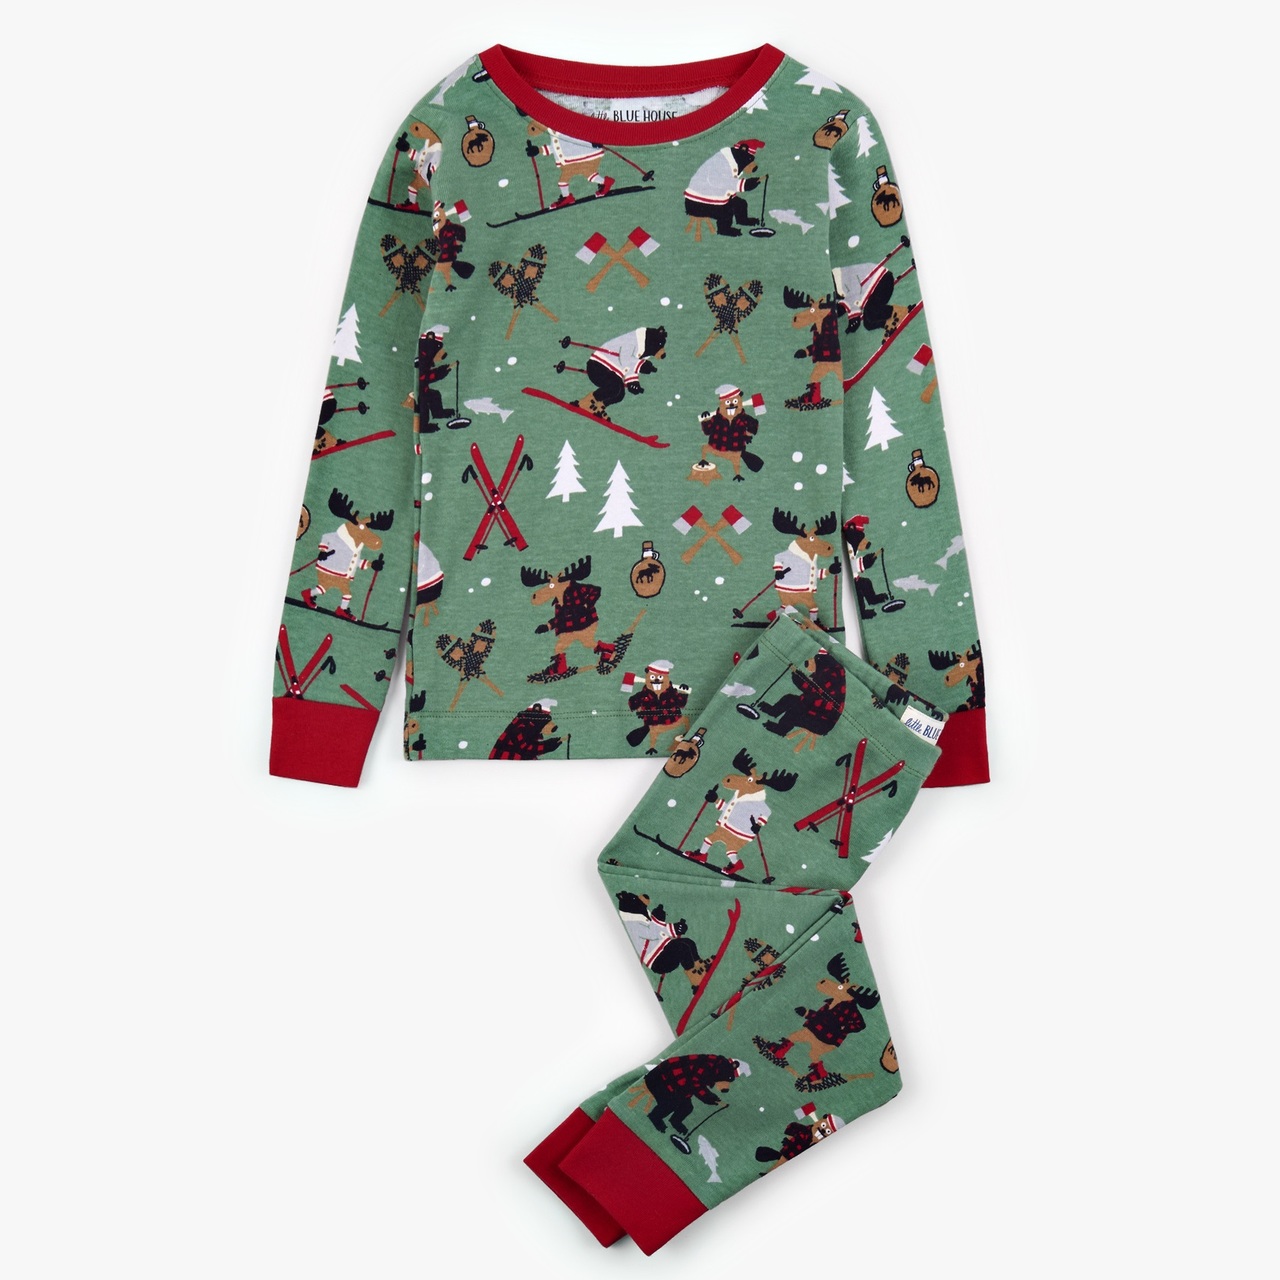 Canadian Winter Kids 2-Piece Pajama Set by Hatley - SIZE 2 ONLY